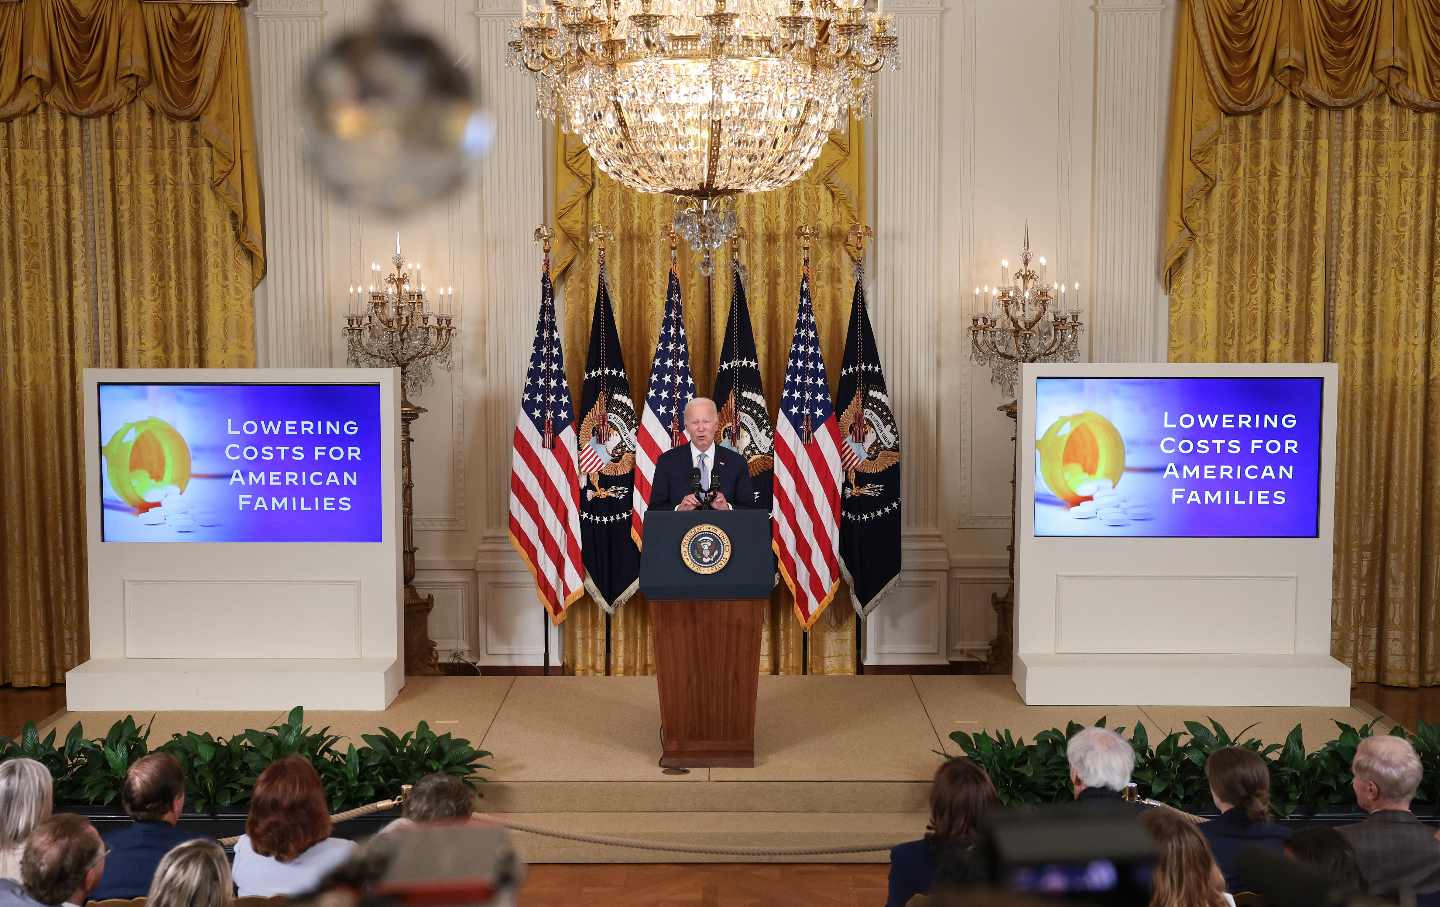 President Joe Biden speaks at an event promoting lower healthcare costs in the East Room of the White House on August 29 in Washington, D.C.